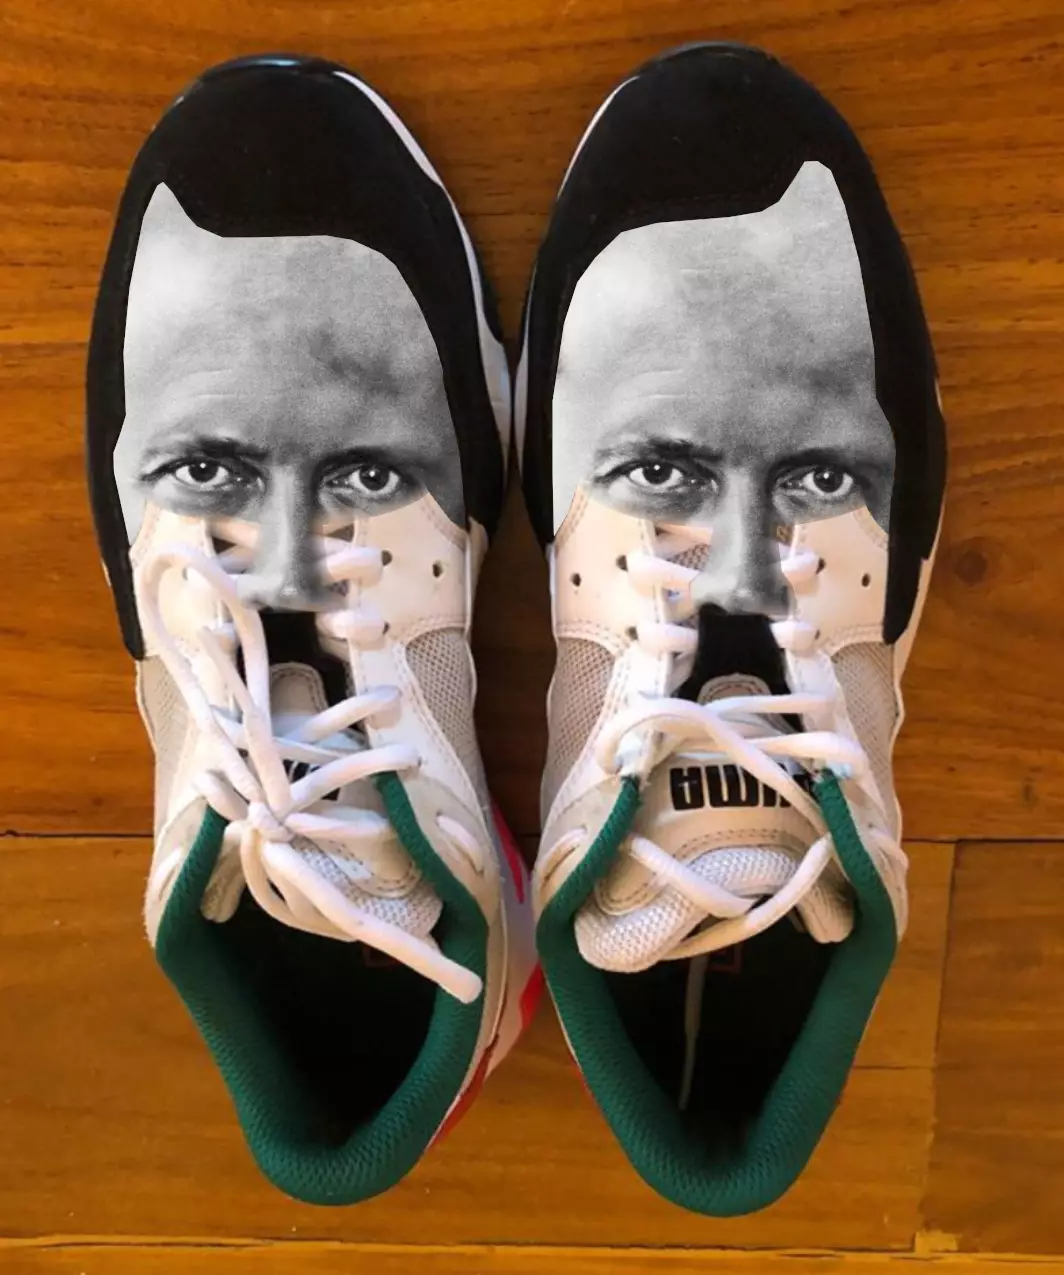 The Nazi leader superimposed over the top of the trainers.